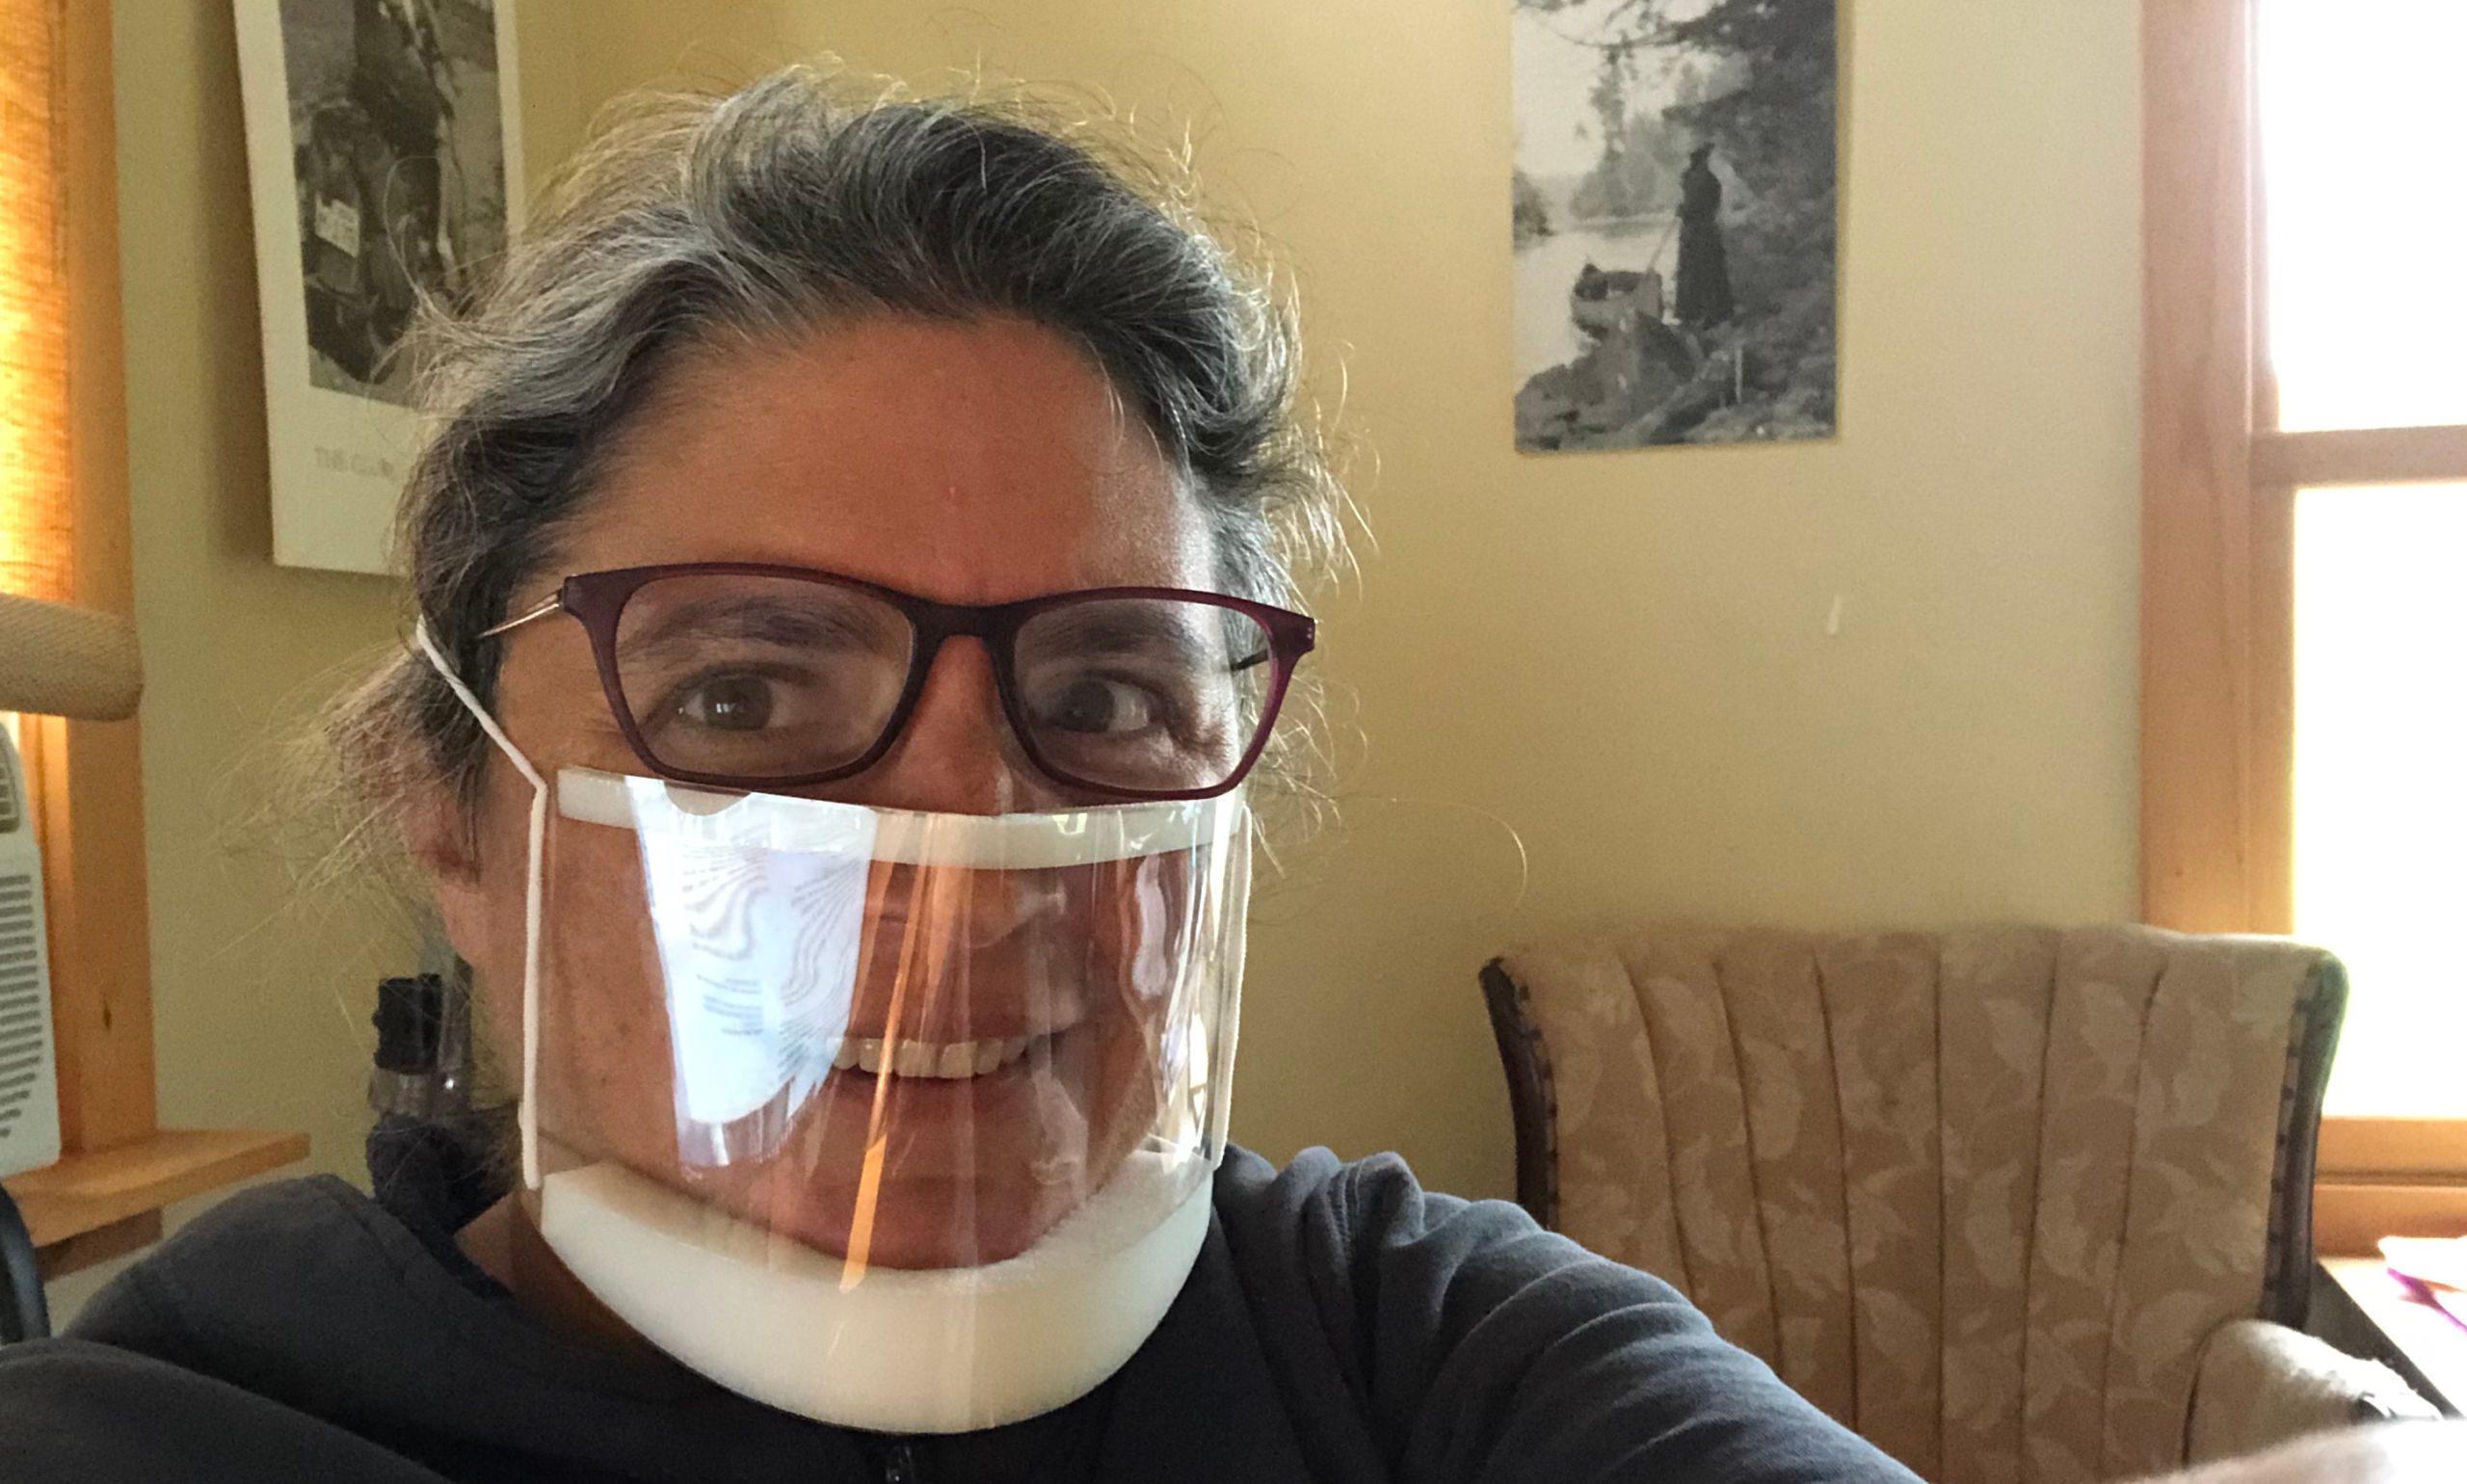 The author smiles wearing a clear mask that is pushing her glasses high on her face and showing considerable glare.